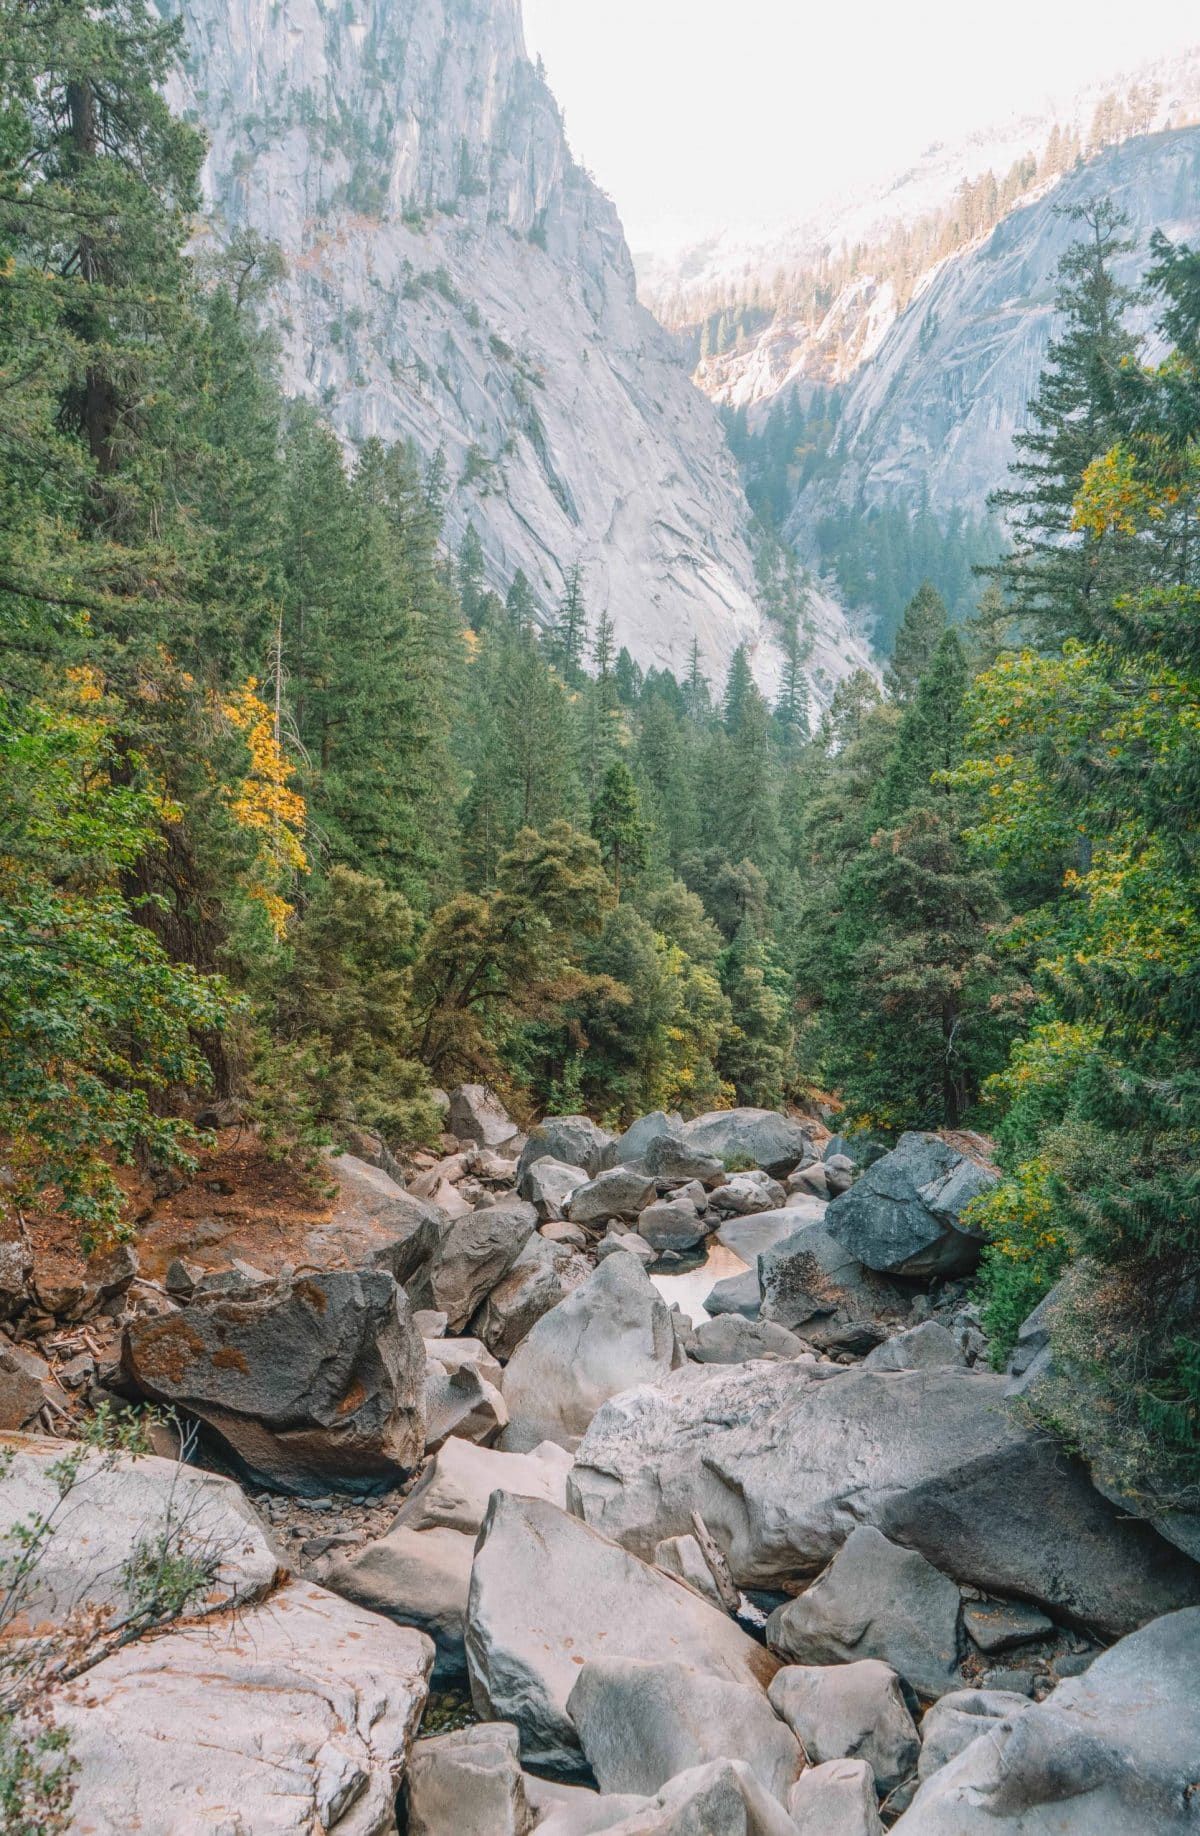 A photo of Yosemite National Park, with rocks, green trees, and large rock faces in the background.